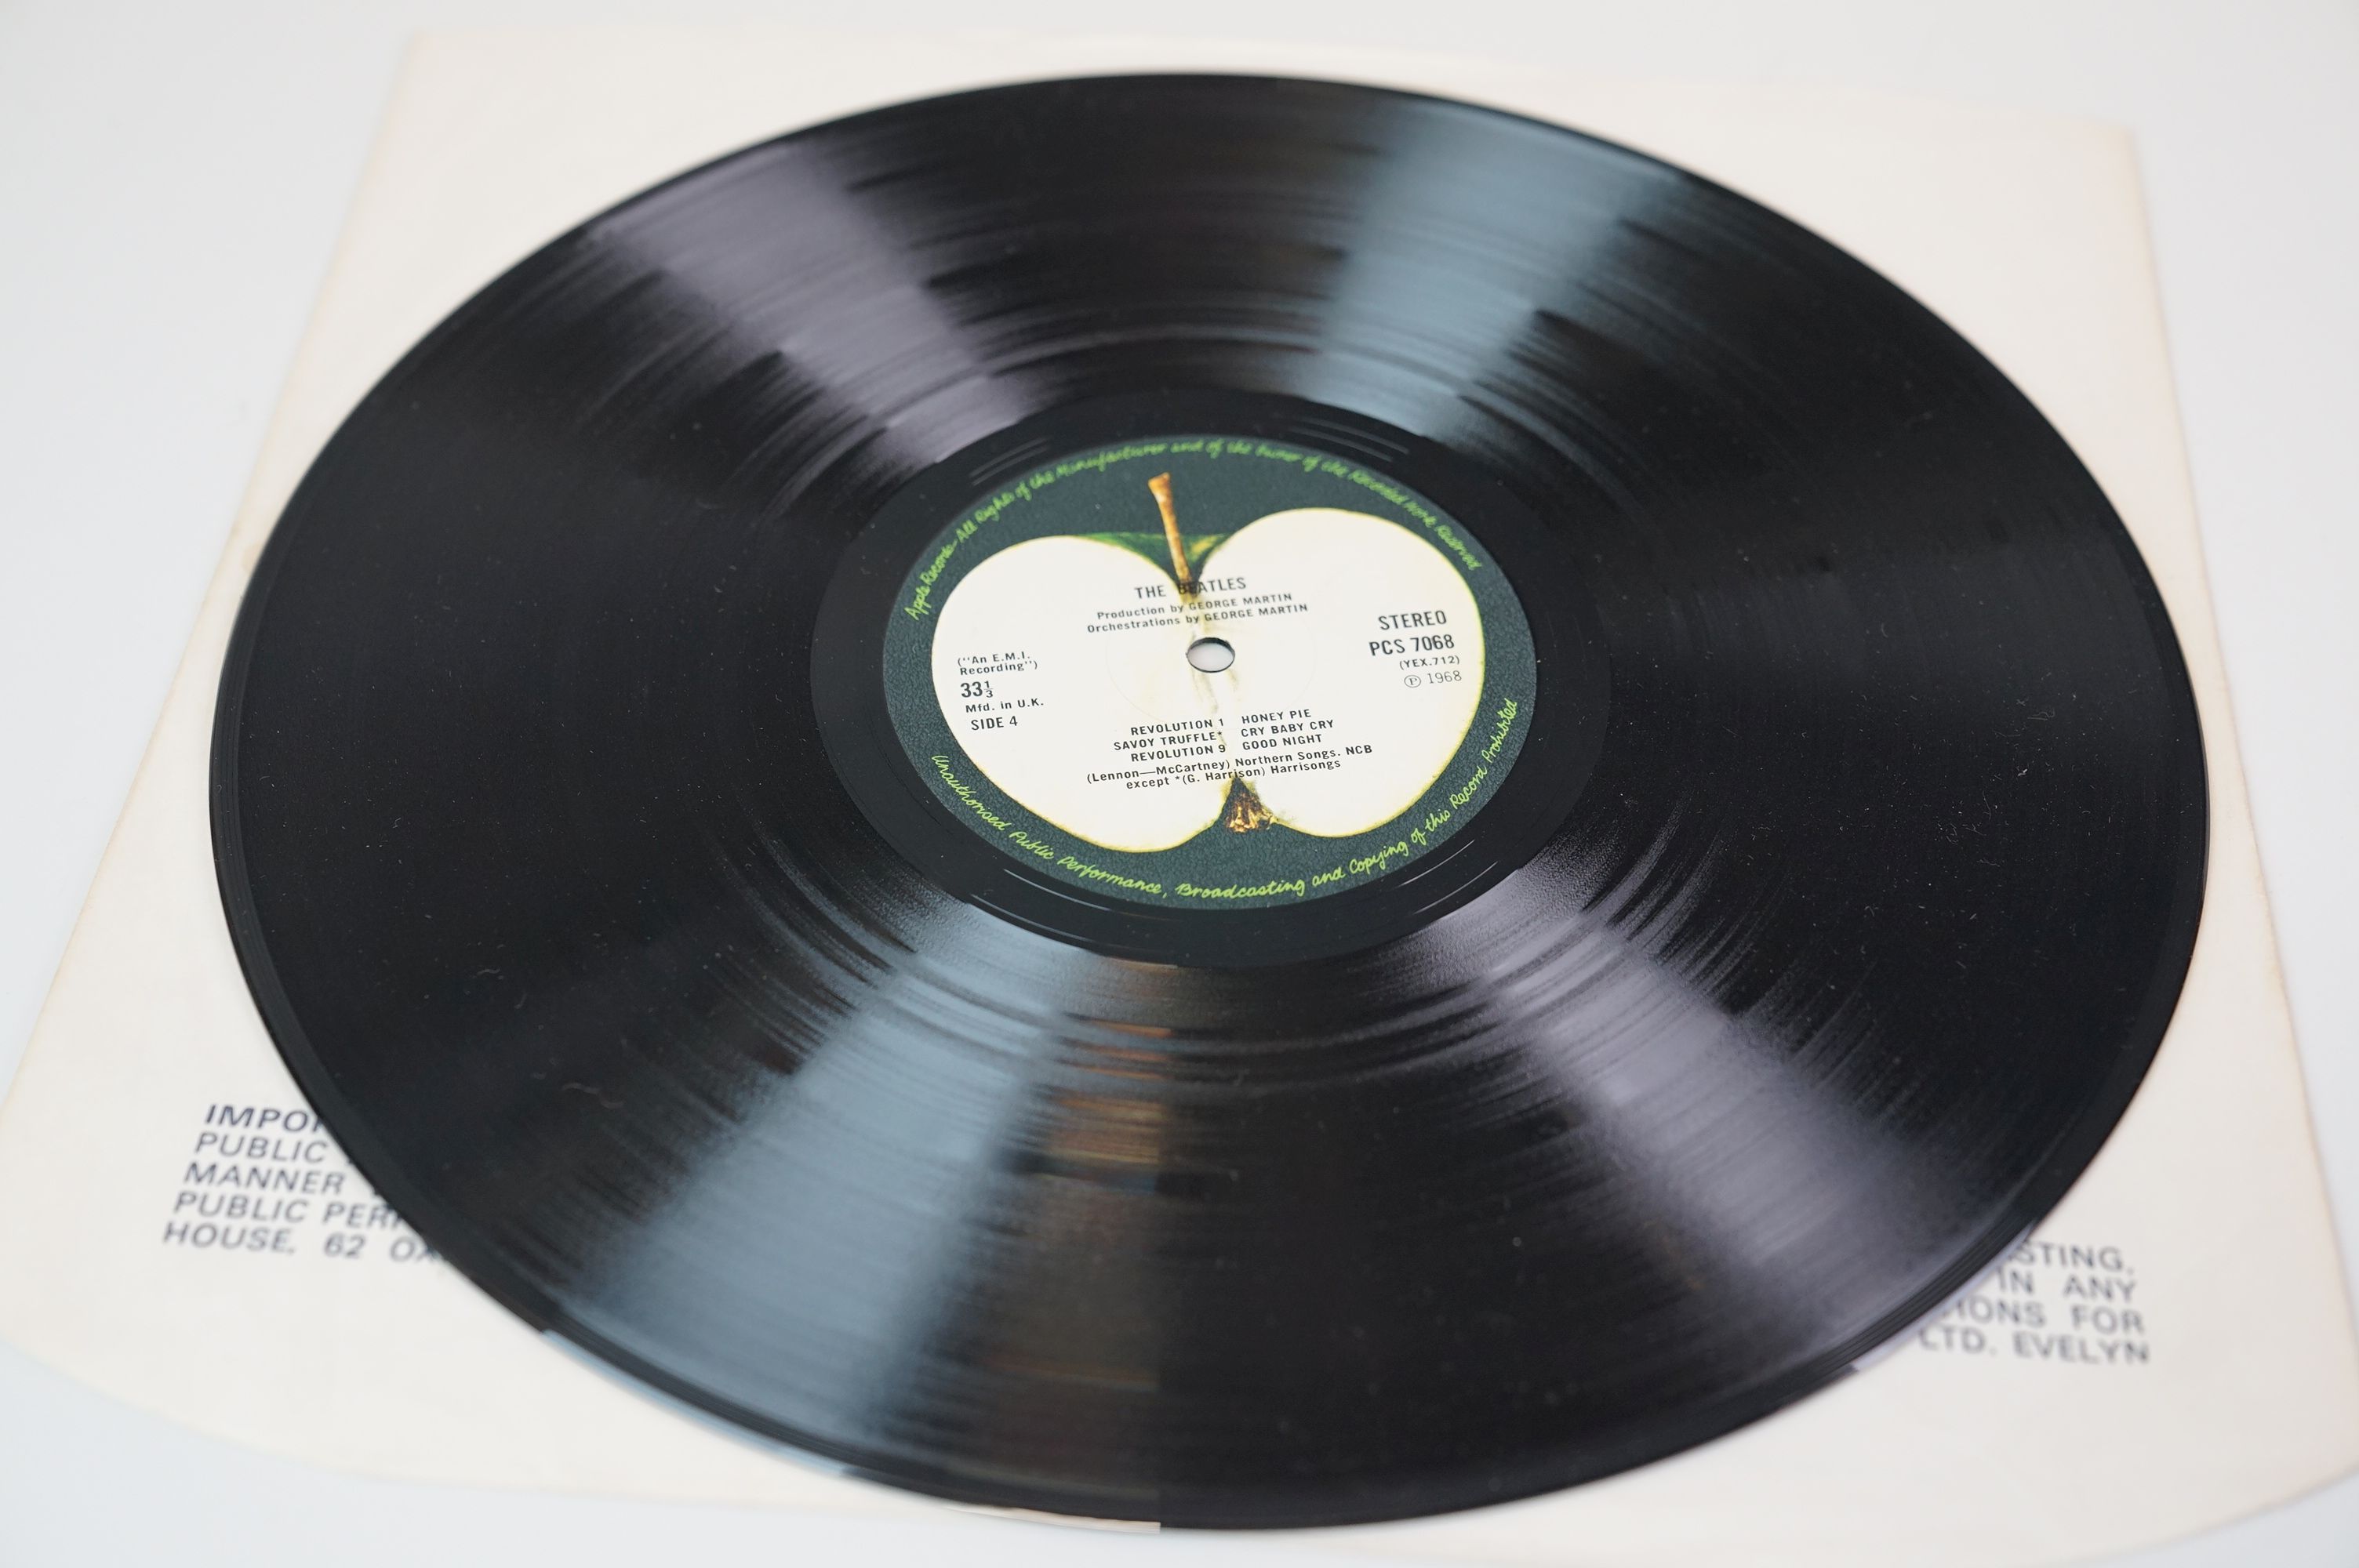 Vinyl - The Beatles White Album PCS7067/8 Stereo side opener no. 296130, 4 photographs and poster ex - Image 14 of 17